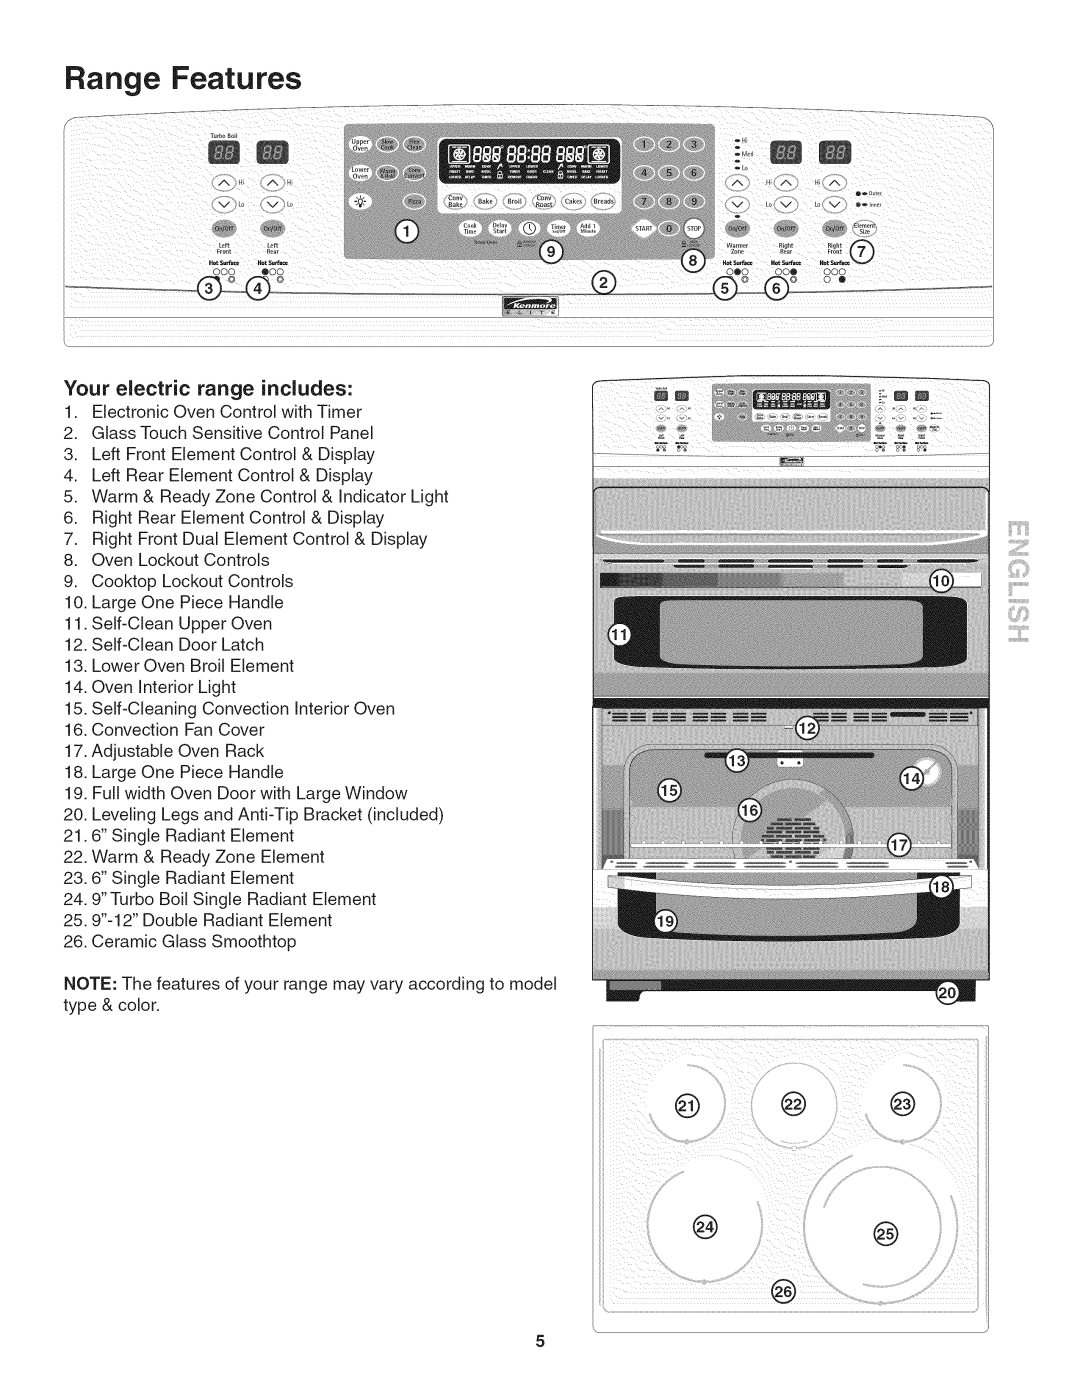 Kenmore 790. 9802 manual Range Features, Your electric range includes 